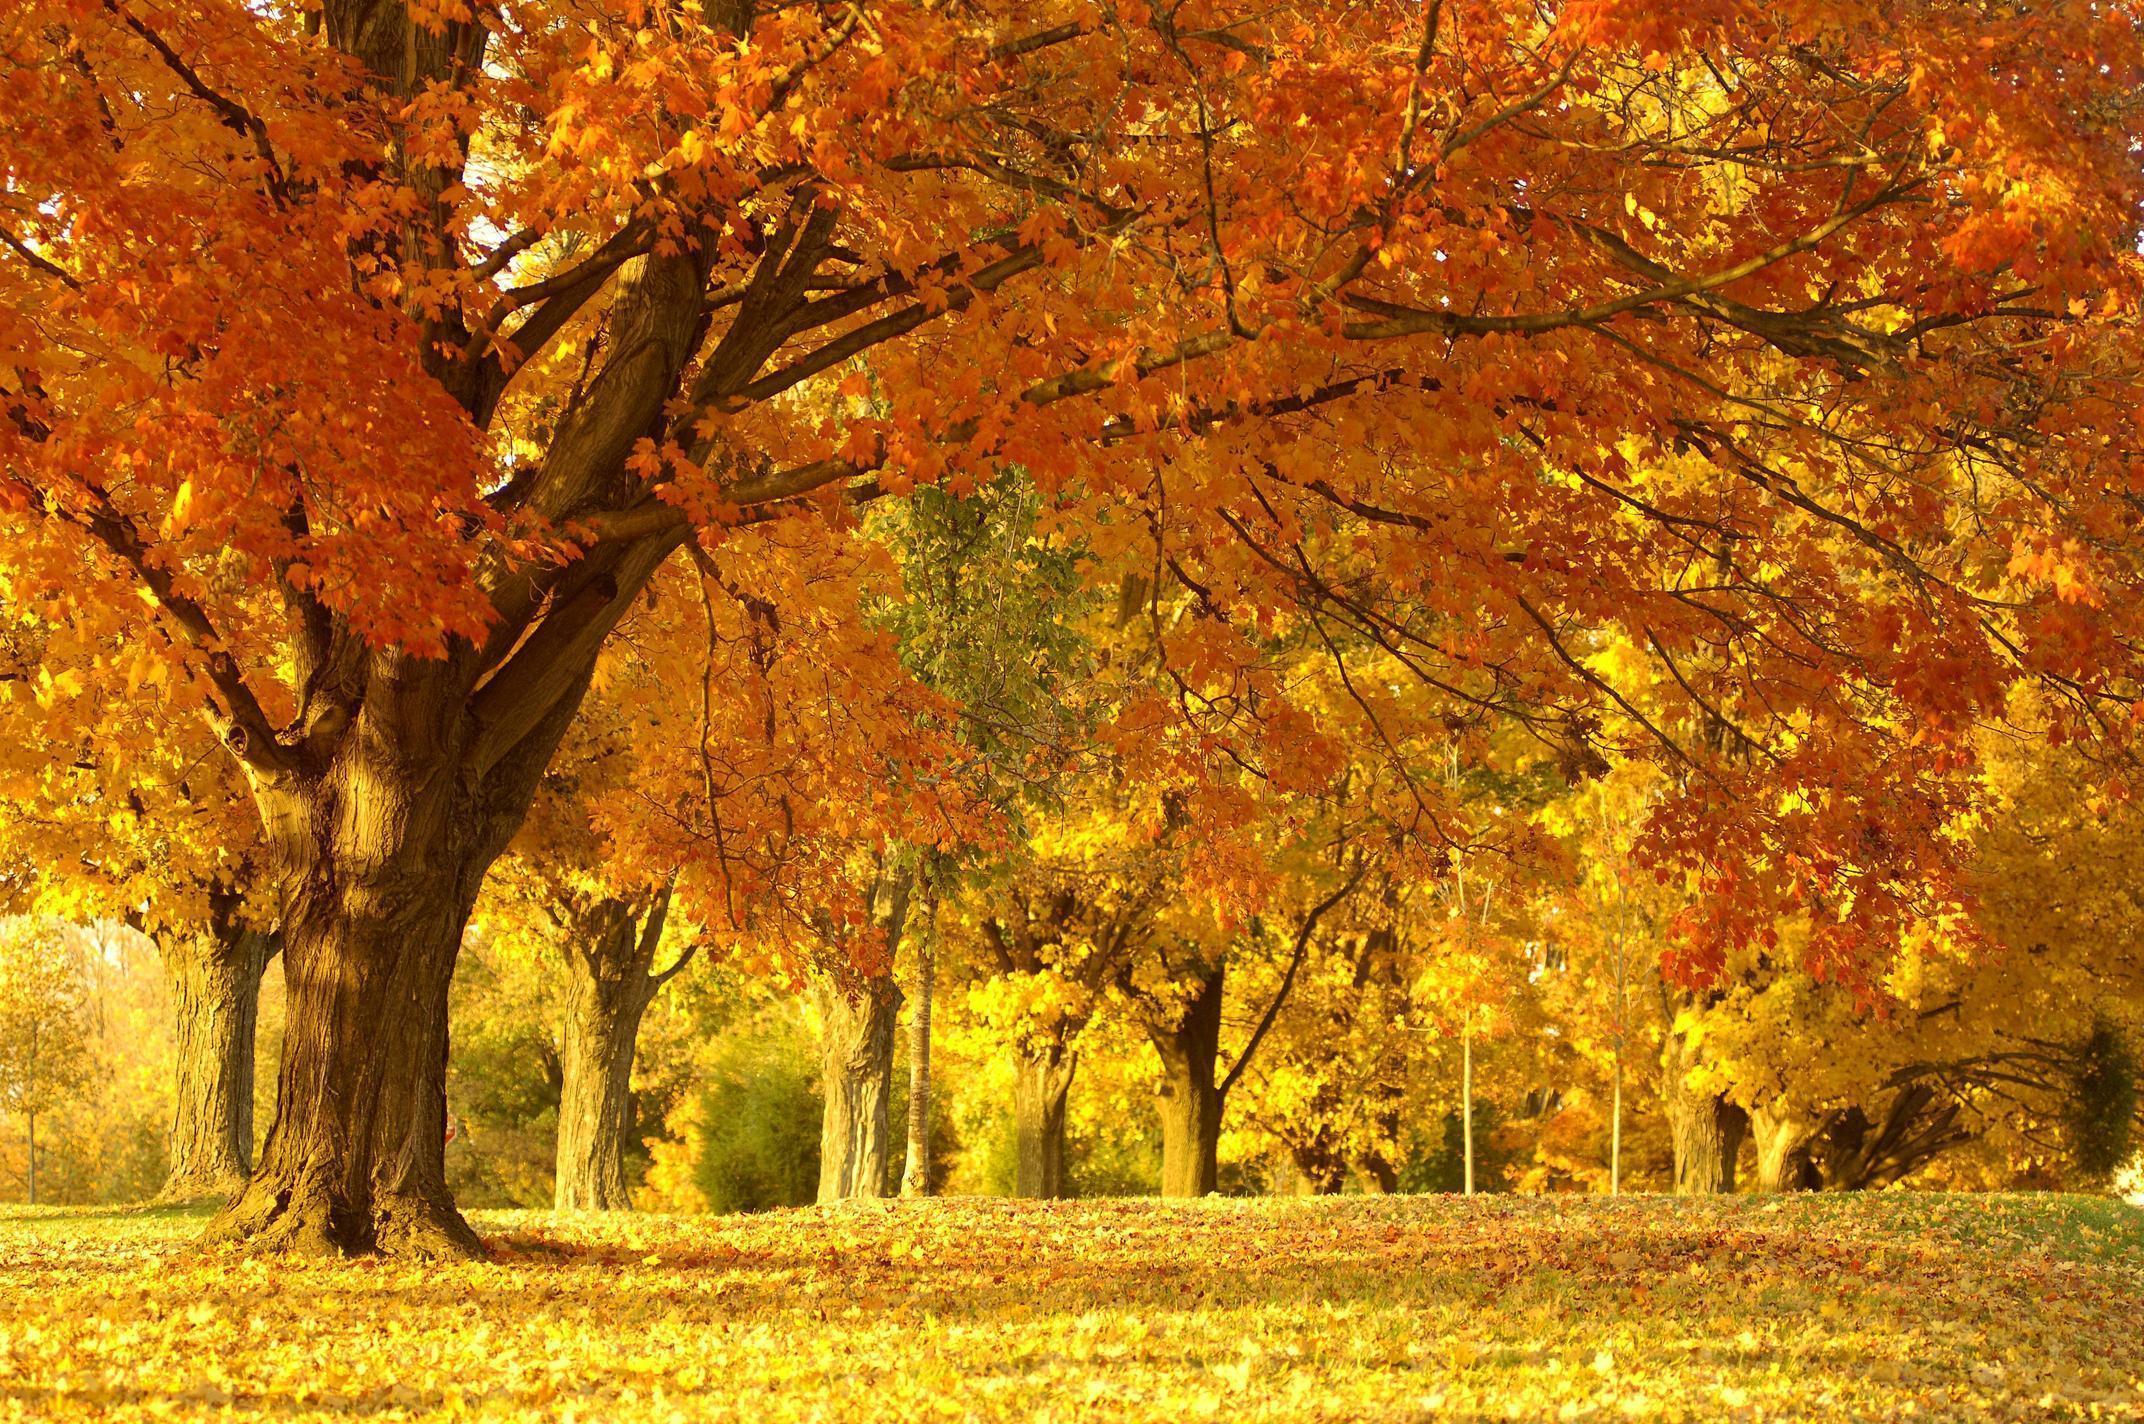 Give Your Desktop a Taste of the Fall Season with These Autumn